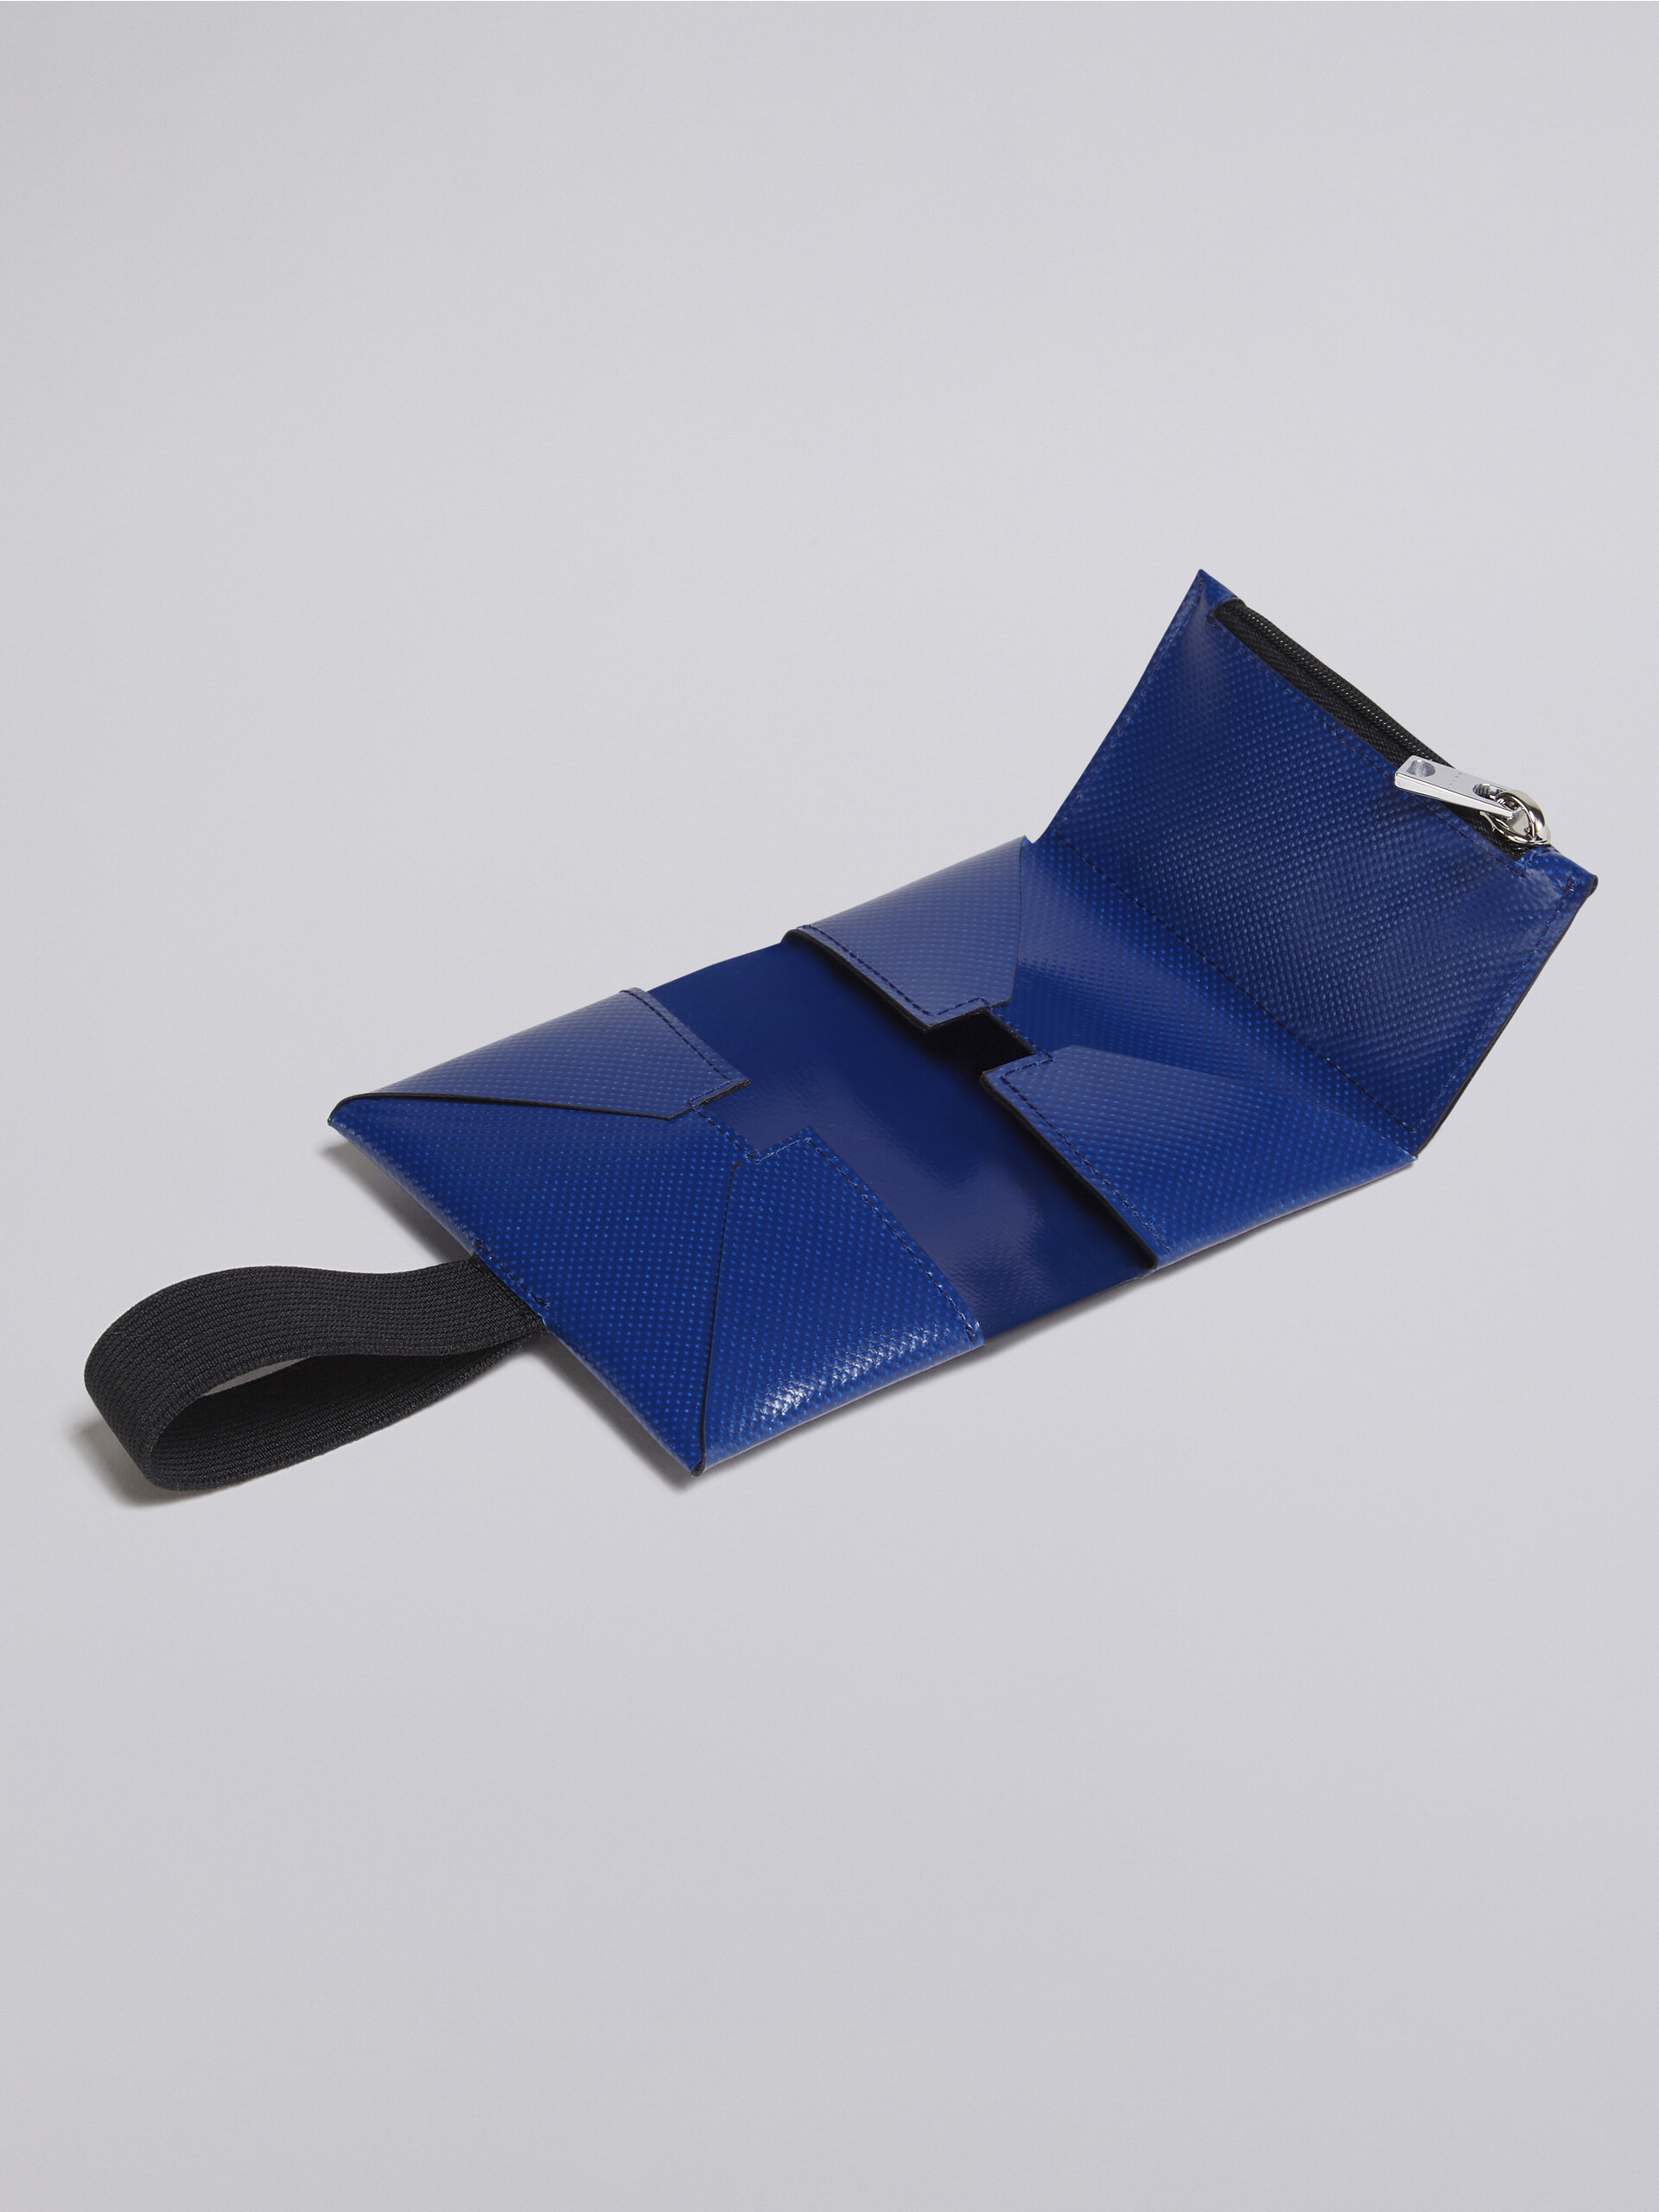 Black and blue origami wallet - Wallets - Image 5